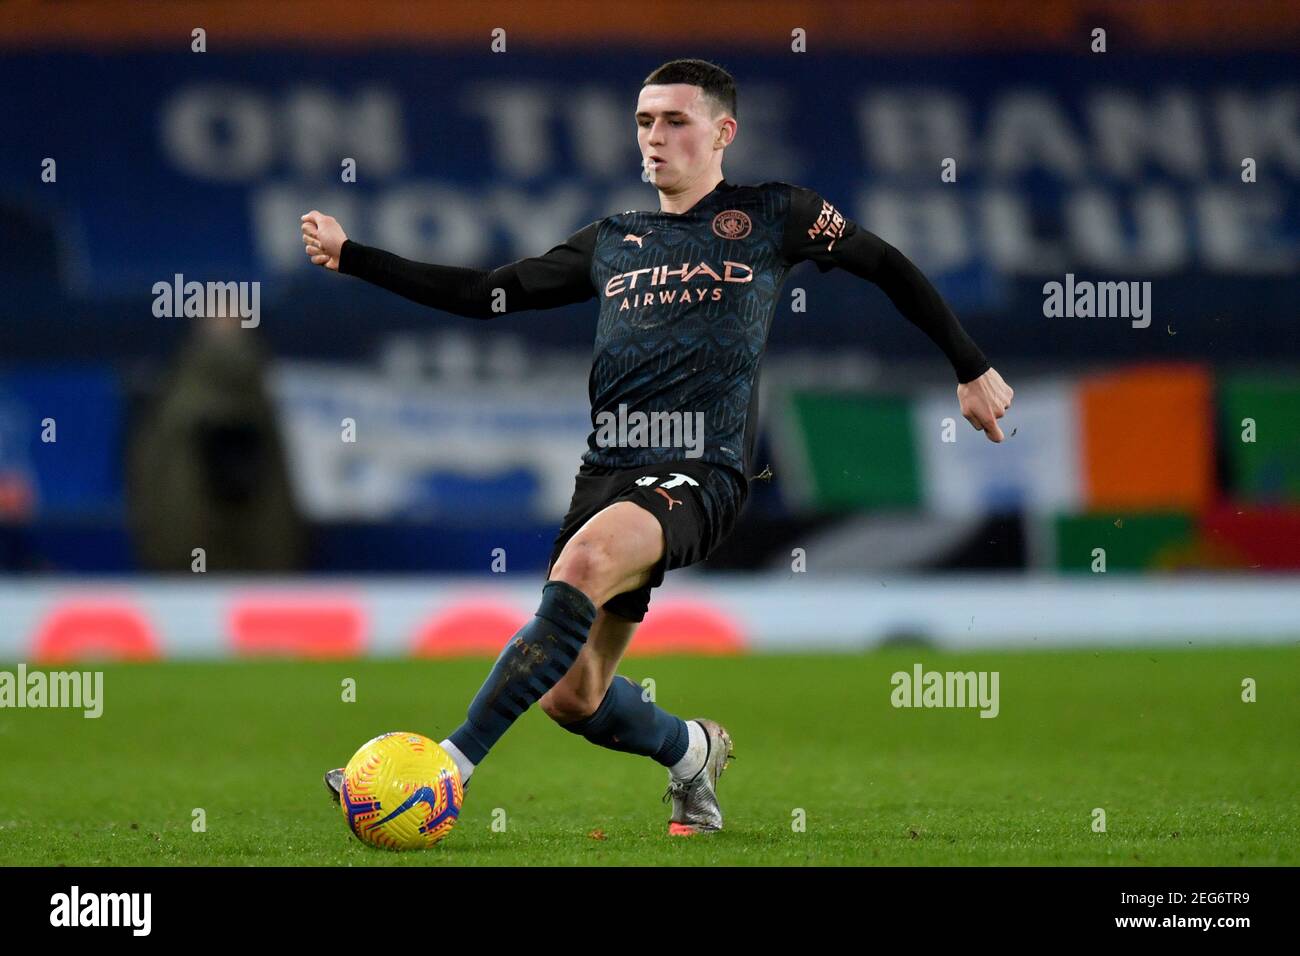 Liverpool, United Kingdom, 17th February 2021. Manchester City's Phil Foden. Credit: Anthony Devlin/Alamy Live News Stock Photo